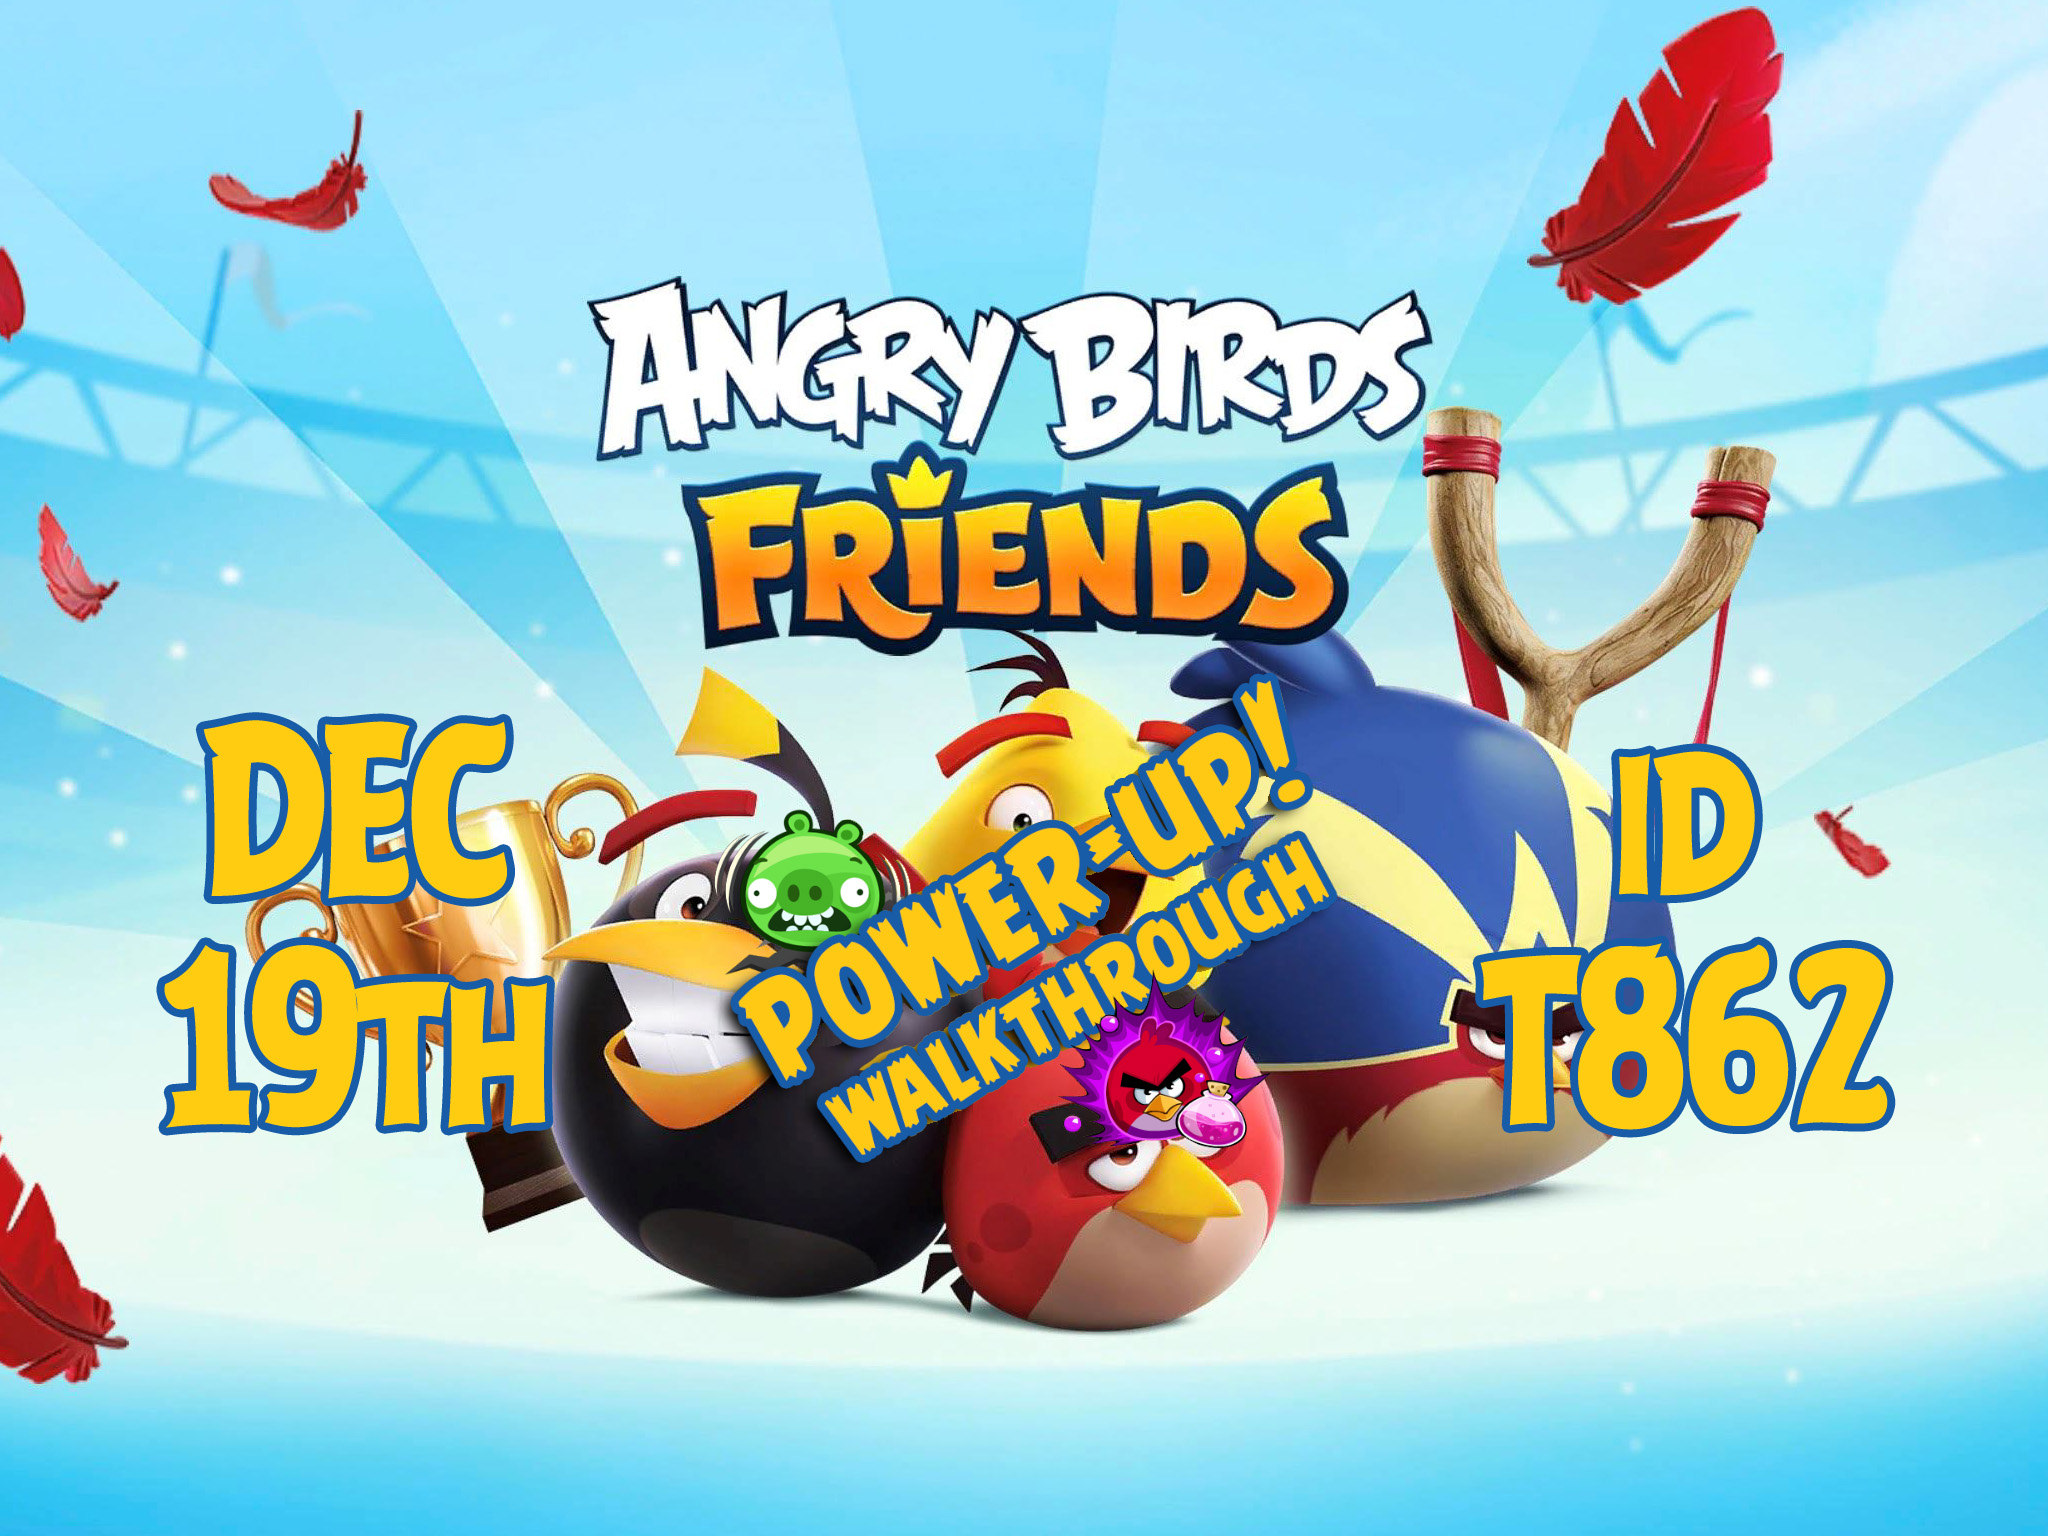 Angry-Birds-Friends-Tournament-T862-Feature-Image-PU